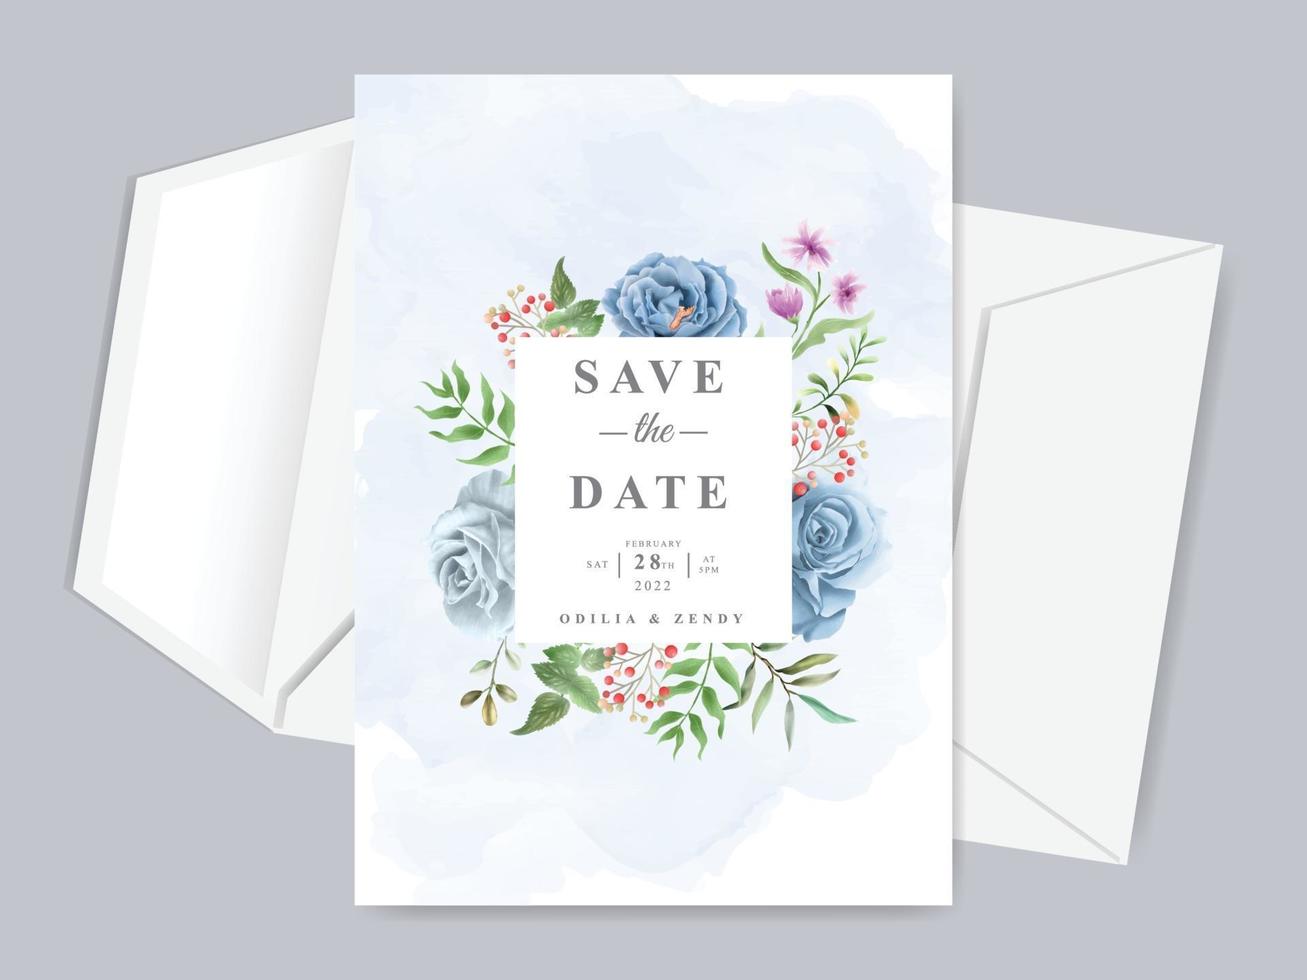 Wedding save the date invitation card template vector